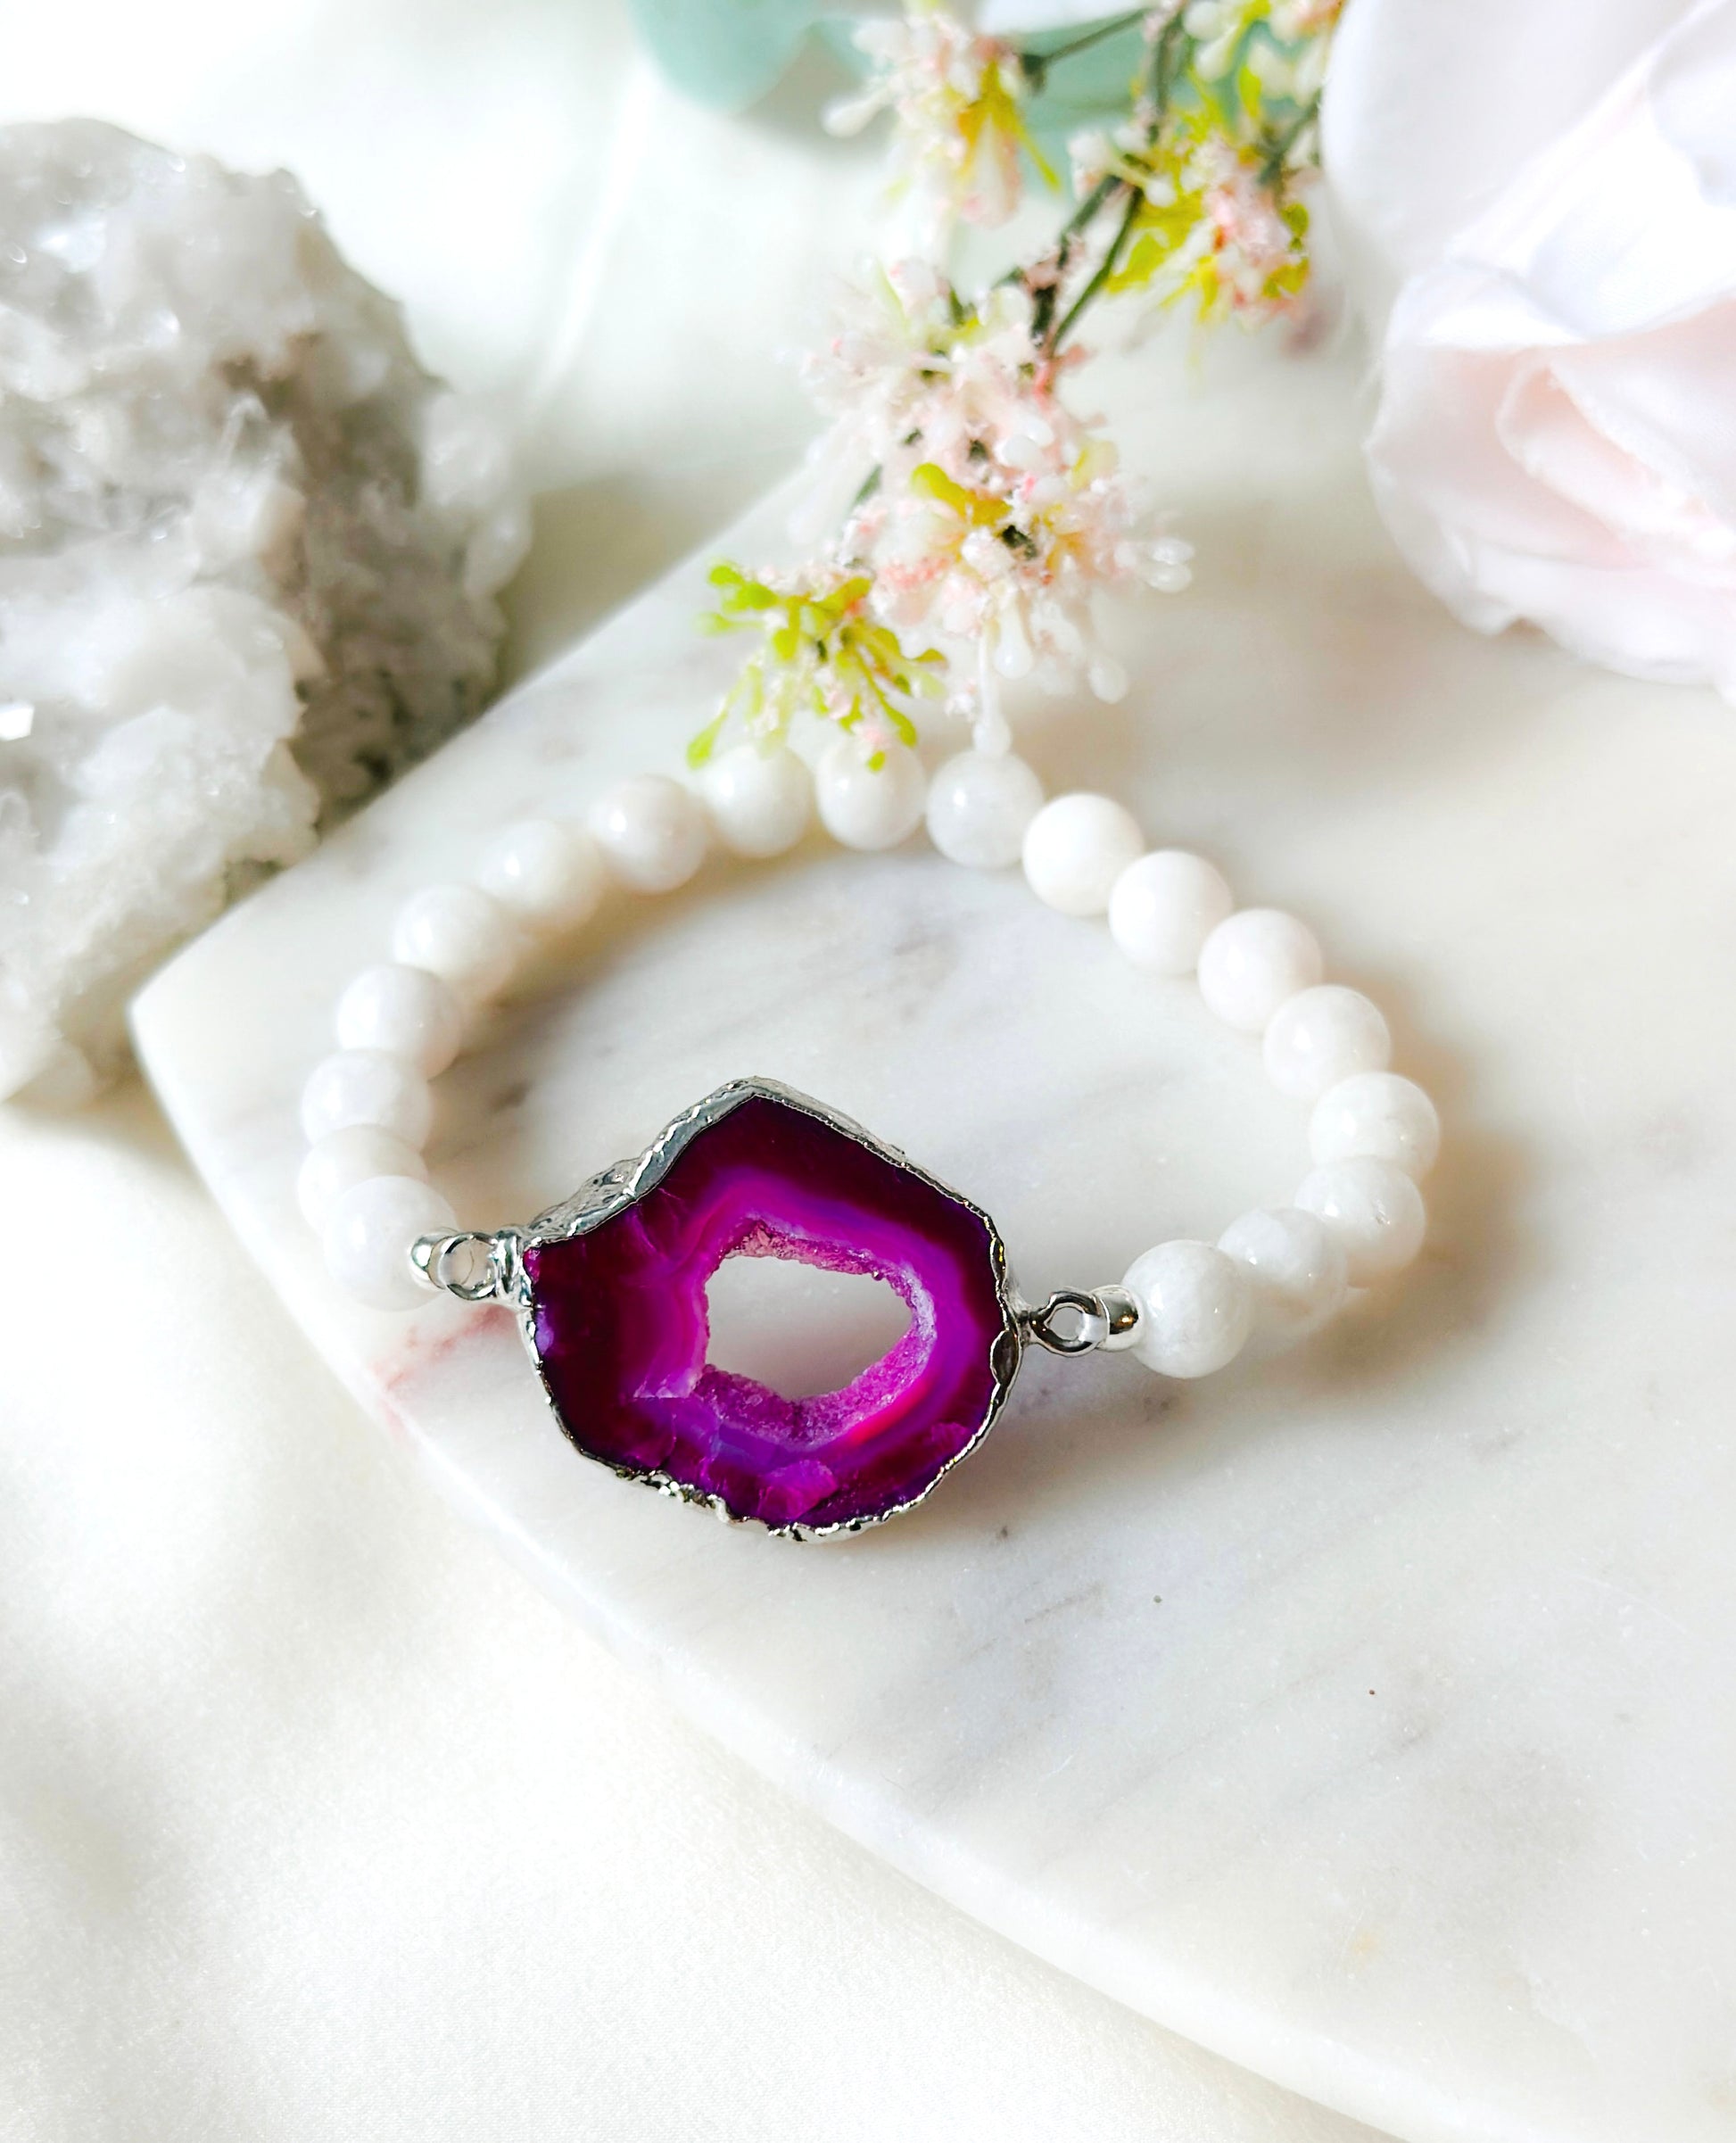 Introducing our "Magenta Moonlight Bracelet," a stunning fusion of beauty and healing. This bracelet features a centerpiece adorned with a mesmerizing fuchsia Druzy agate connector, exuding a delicate charm and a touch of nature's artistry. The soft, rosy hues of the agate evoke feelings of love and tranquility.

